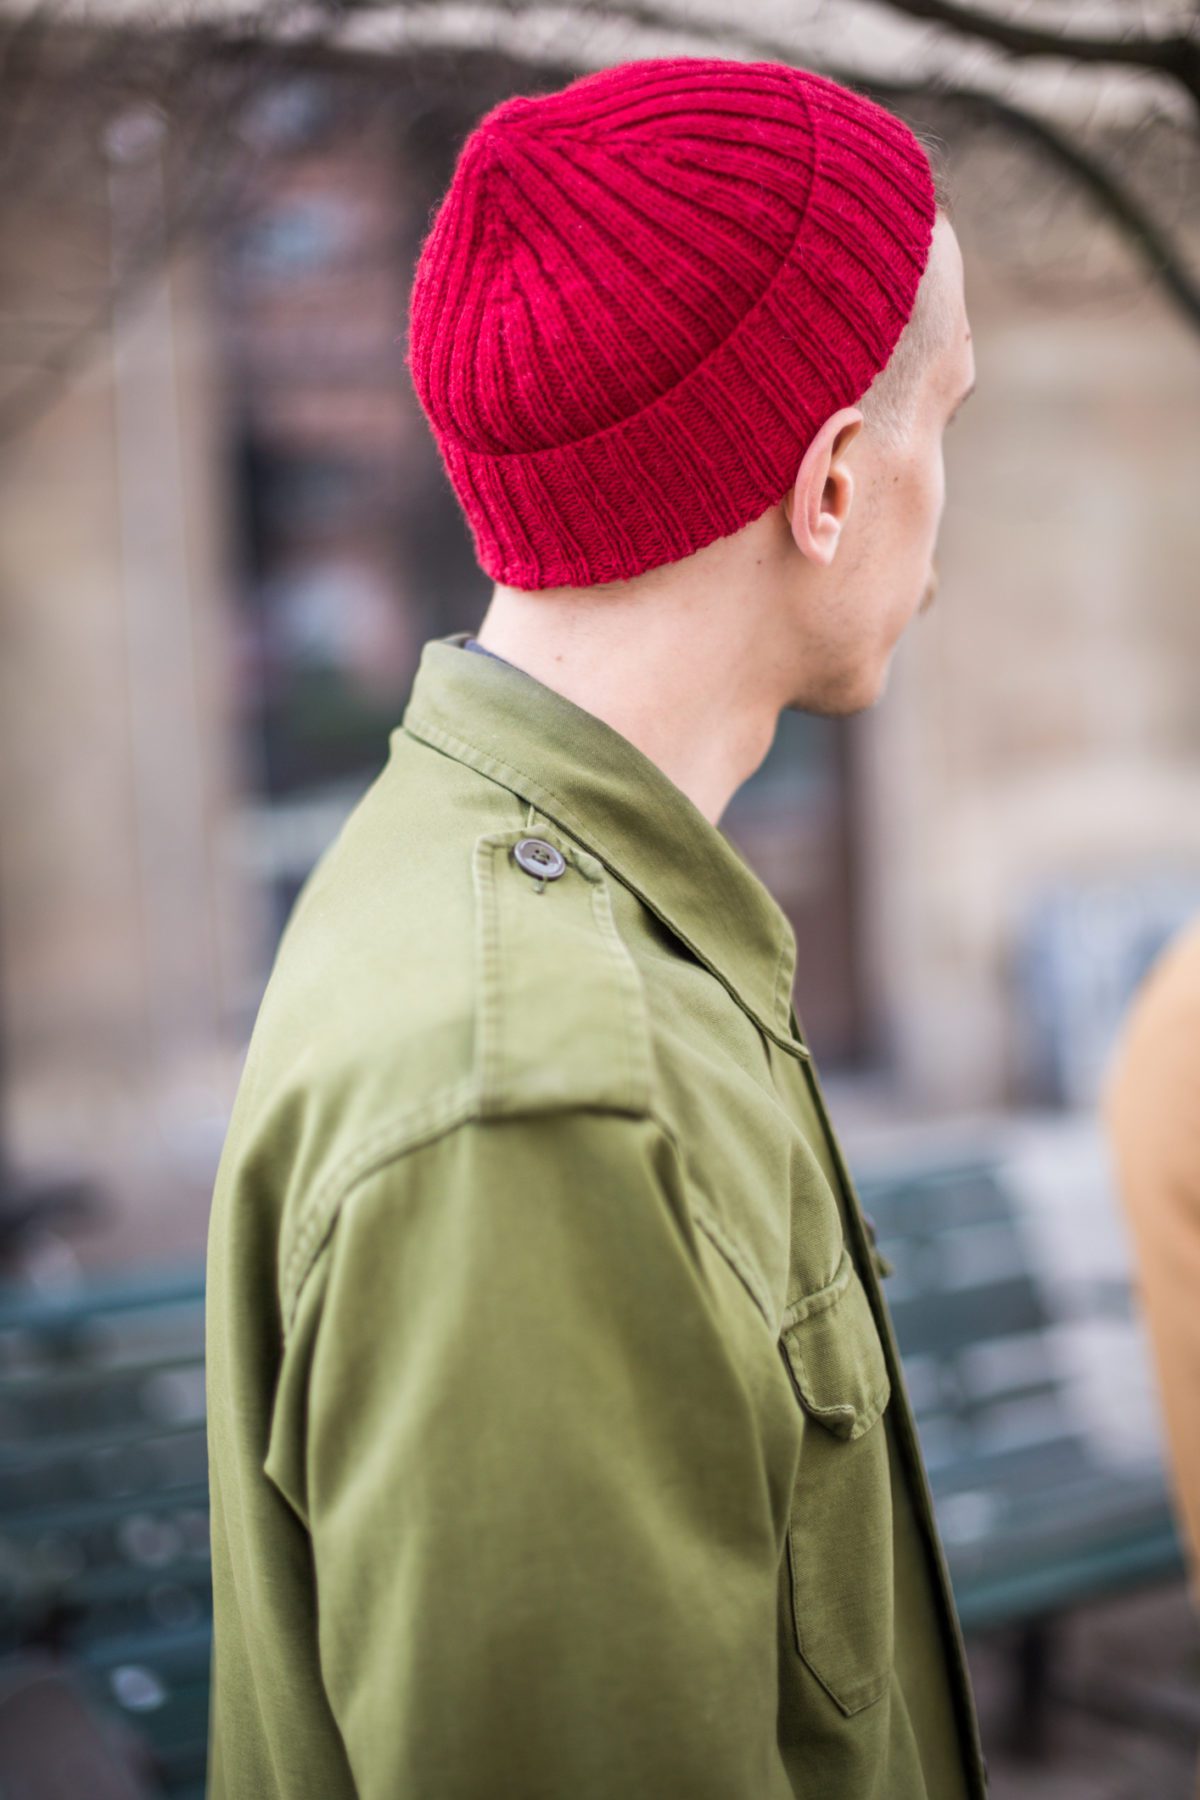 Red fisherman beanie with an army green jacket